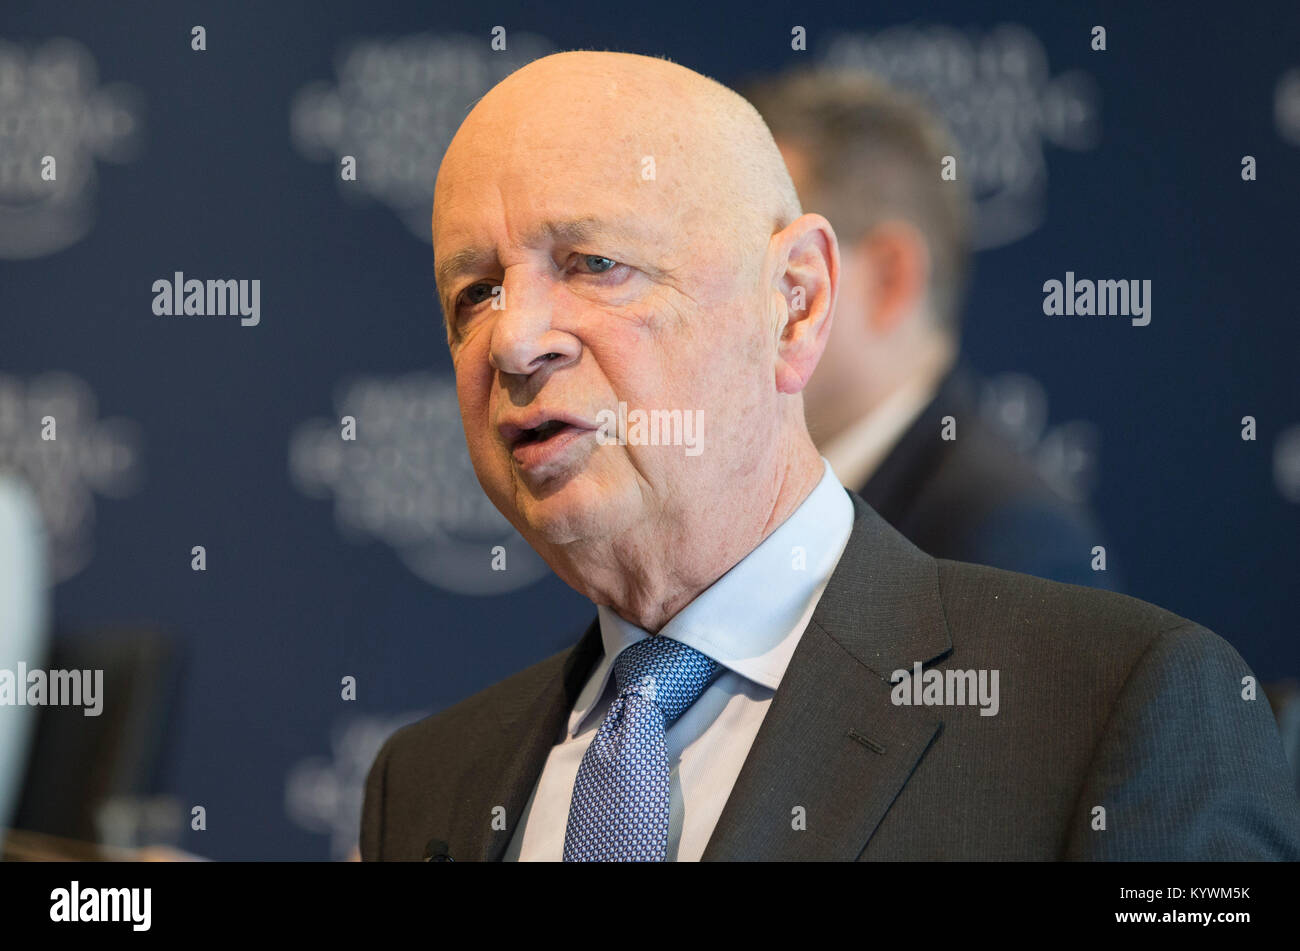 Geneva, Switzerland. 16th Jan, 2018. Founder and Chief Executive of the World Economic Forum (WEF) Klaus Schwab speaks at a press conference in Geneva, Switzerland, Jan. 16, 2018. Some 70 heads of state and government and 38 heads of international organizations will debate 'creating a shared future in a fractured world' -- the theme of this year's World Economic Forum in Davos from Jan. 23 to Jan. 26. Credit: Xu Jinquan/Xinhua/Alamy Live News Stock Photo